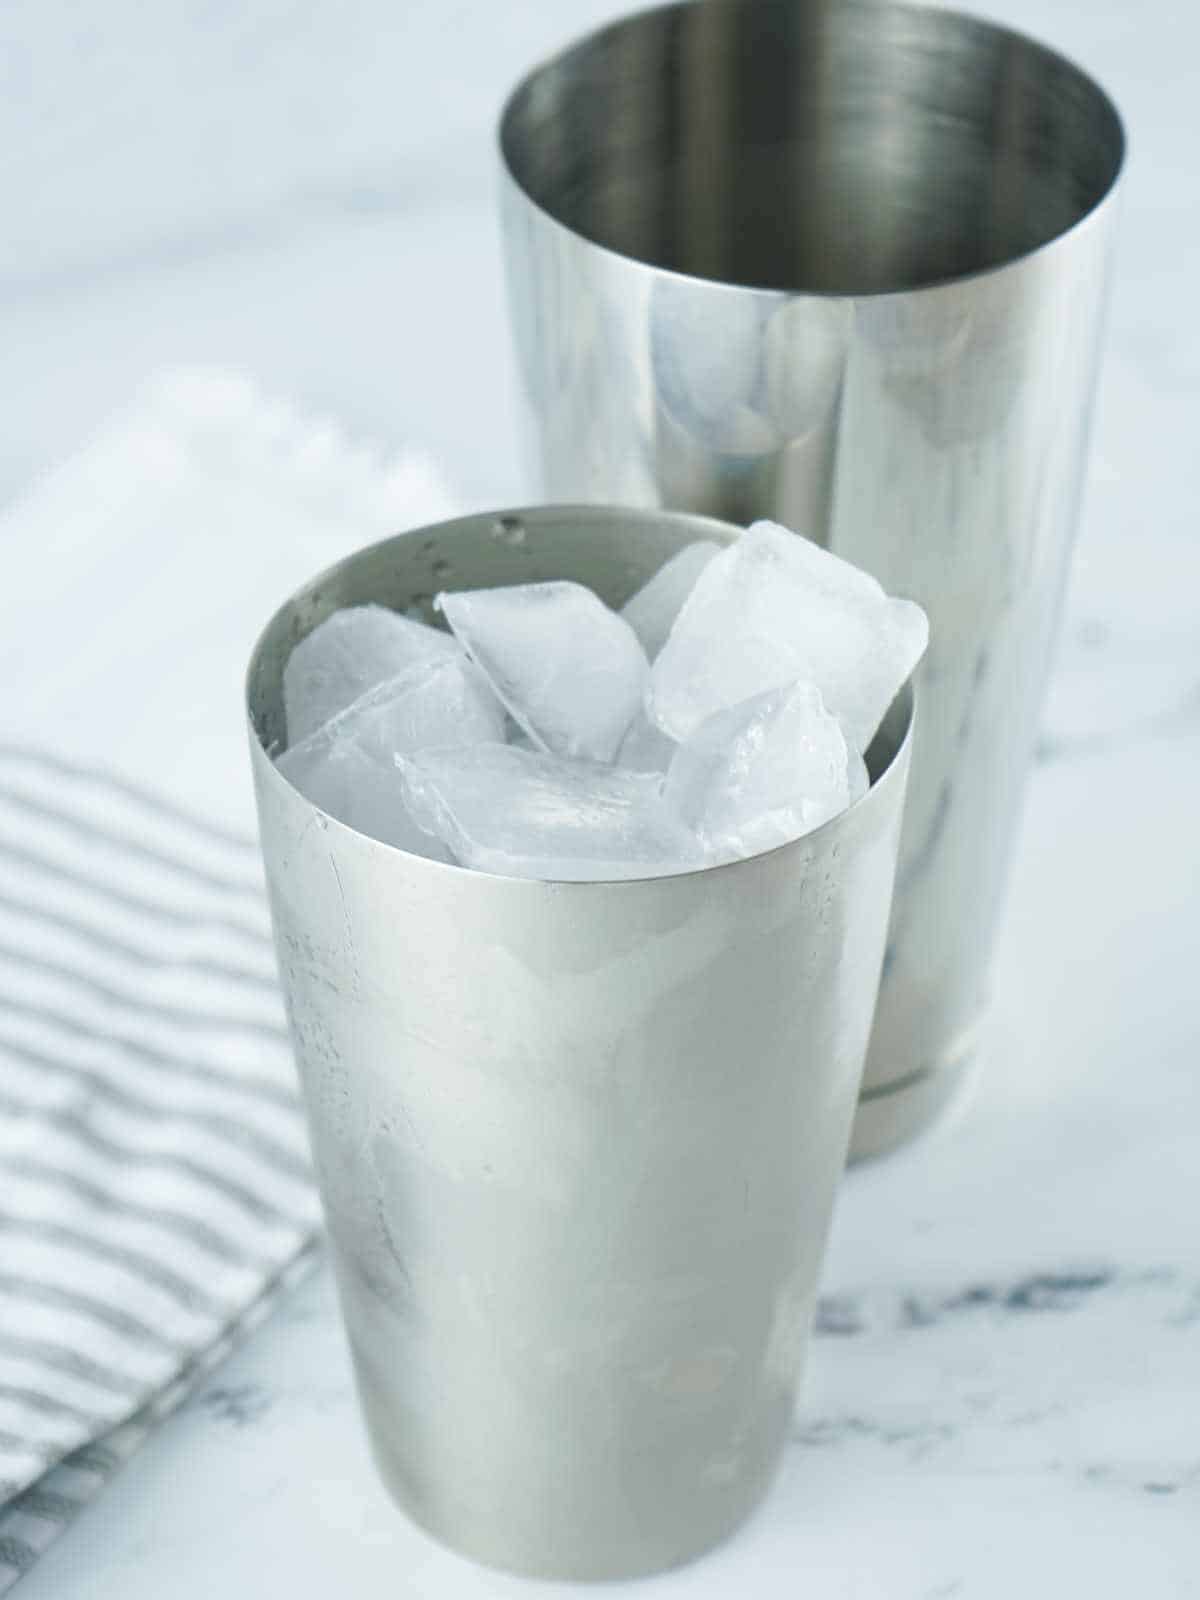 Ice added to a cocktail shaker.